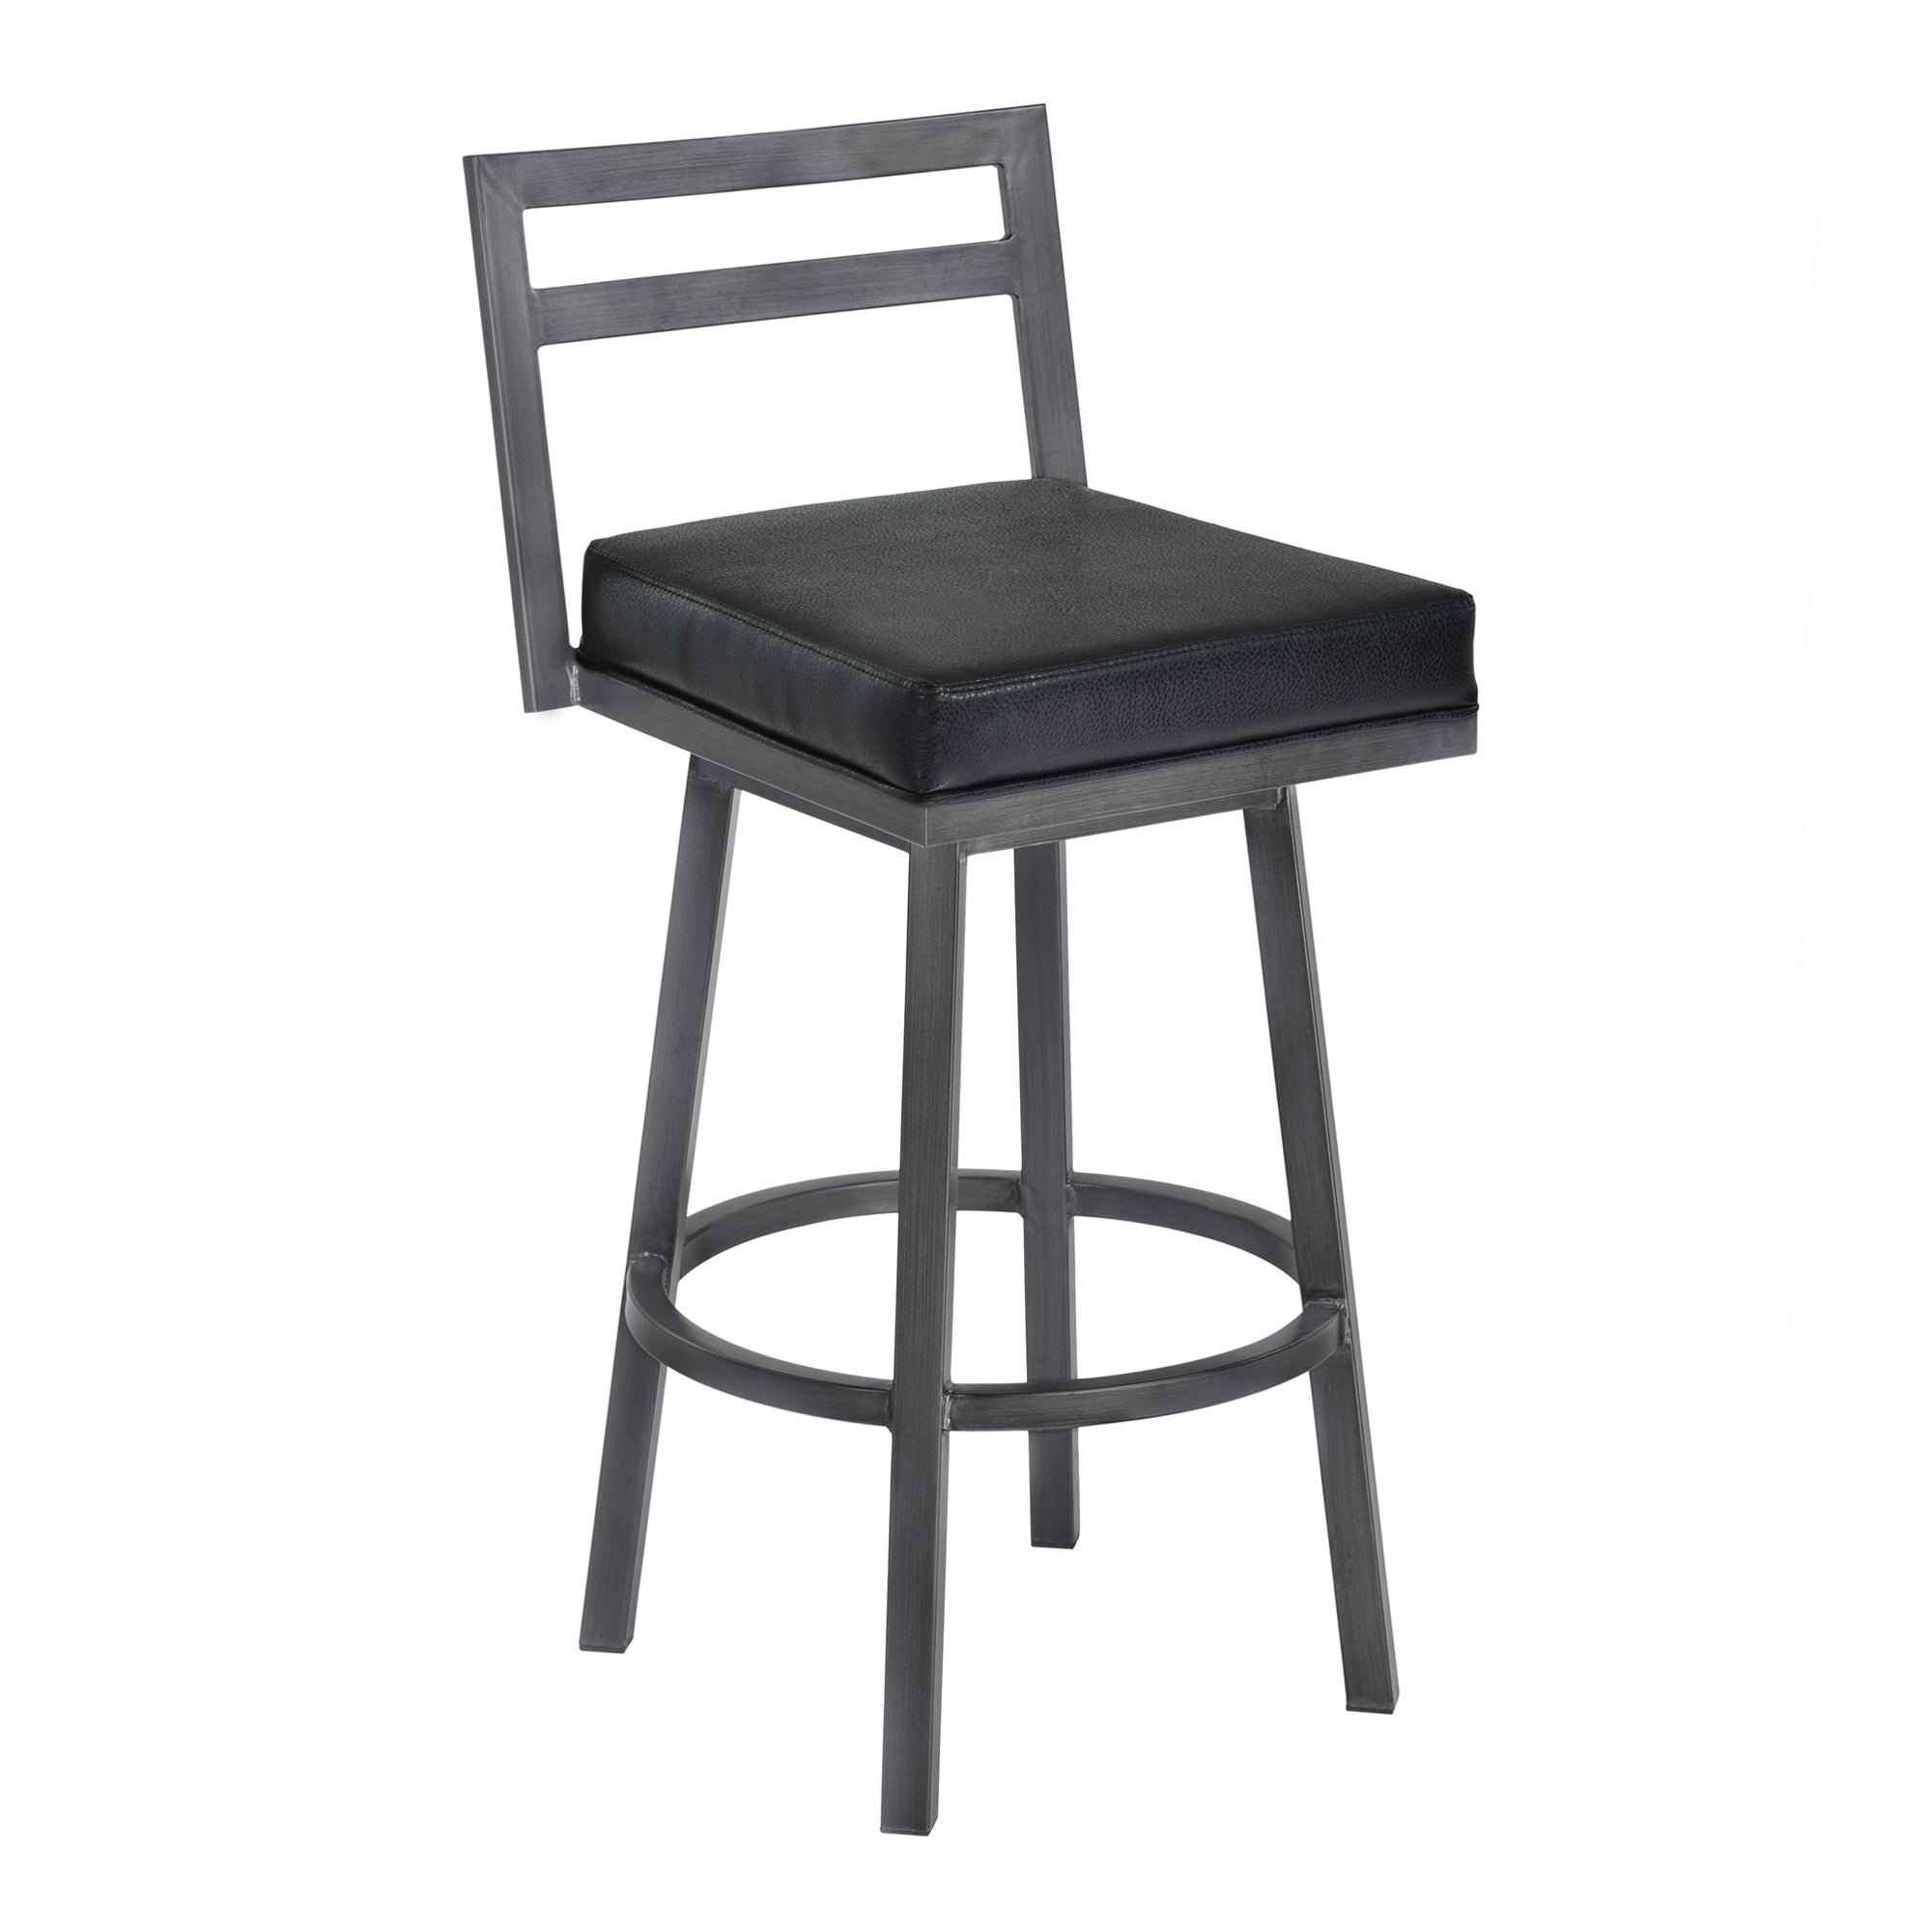 Armen Living Lcmobamfbl30 Moniq 30" Bar Height Metal Swivel Barstool In Ford Black Faux Leather And Mineral Finish